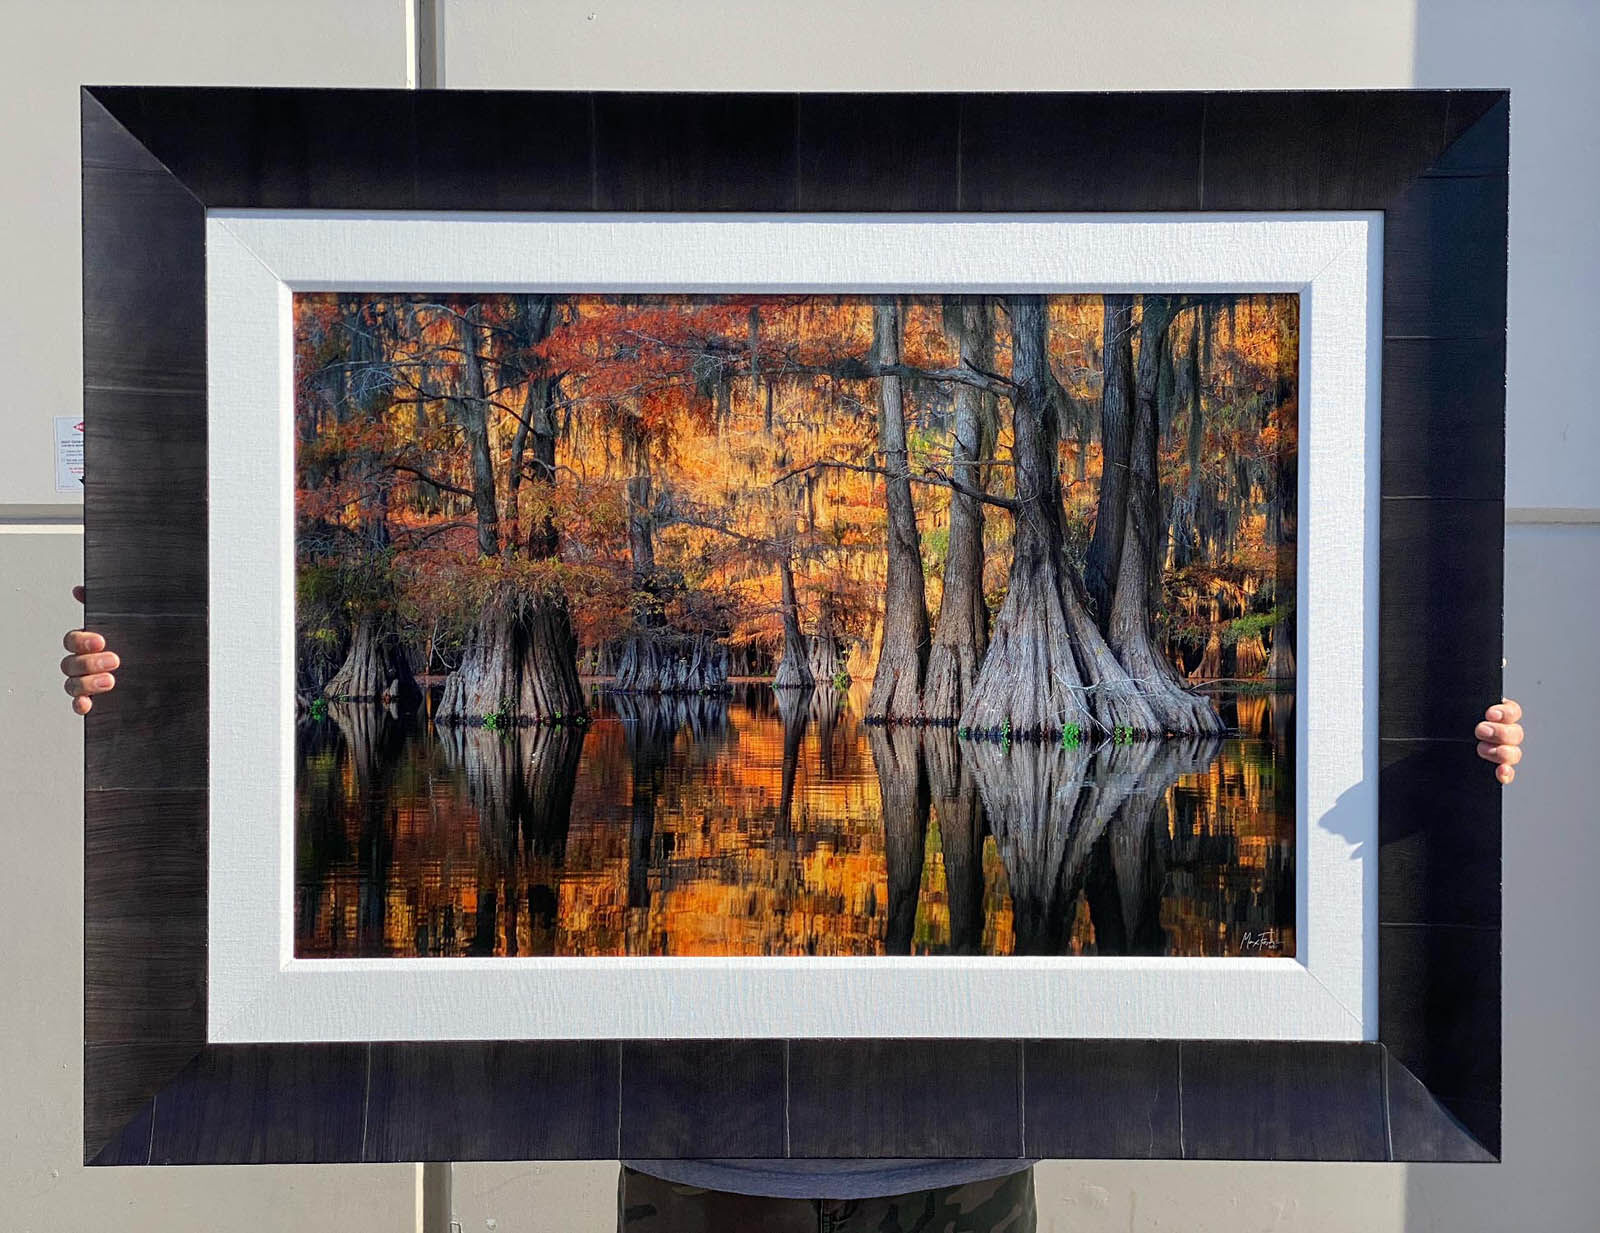 A 24x36" Gallery Ultra+ Trulife Acrylic Print of "Golden Glory" with a Tabacchino Dark Ash frame and white liner.